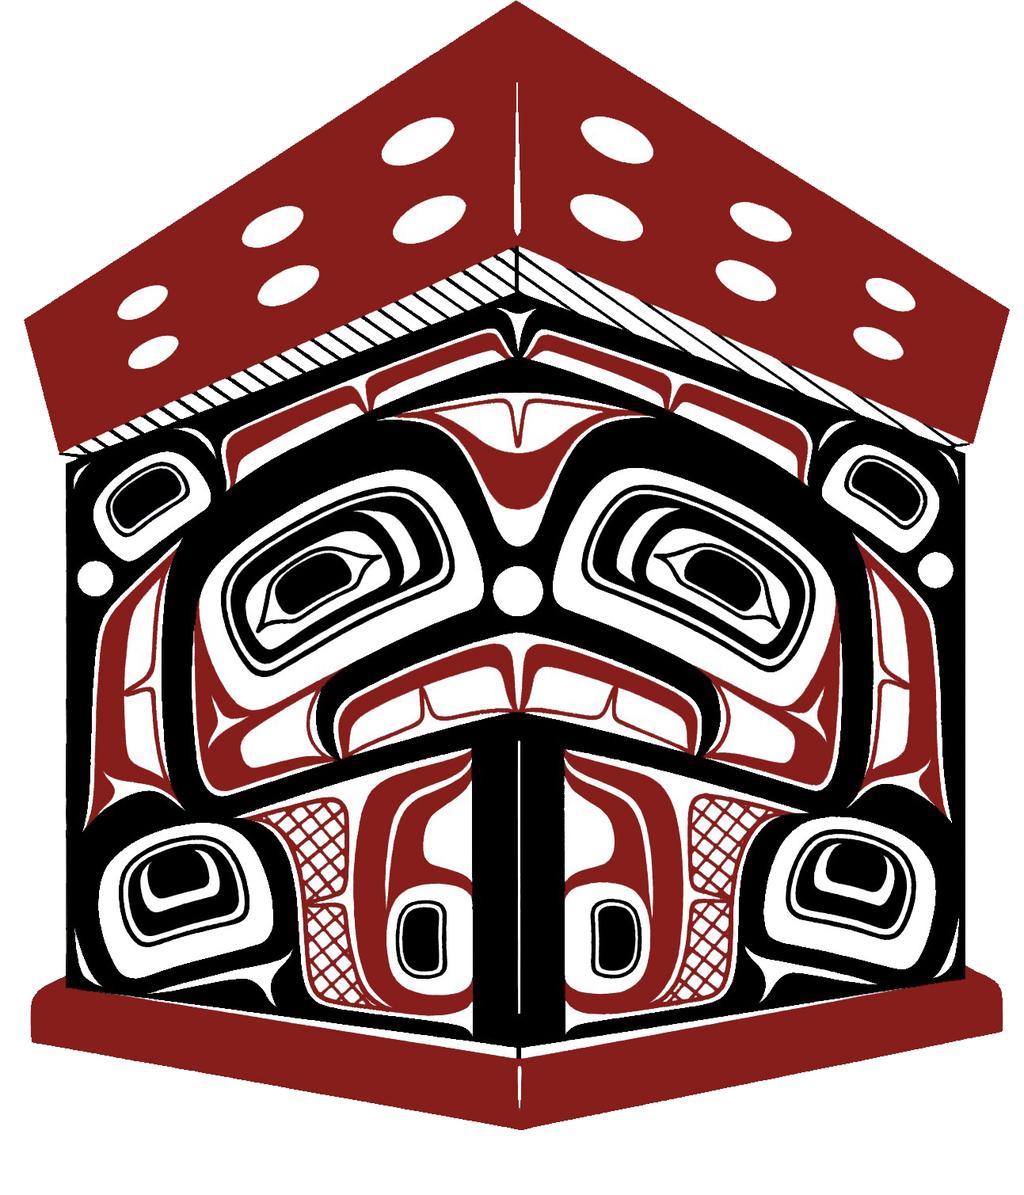 Grade Levels K-5 Tlingit Cultural Significance Elizabeth Peratrovich was a member of the Lukaax.adi clan, part of the raven moiety. She is an important Civil Rights leader for Alaska Natives.